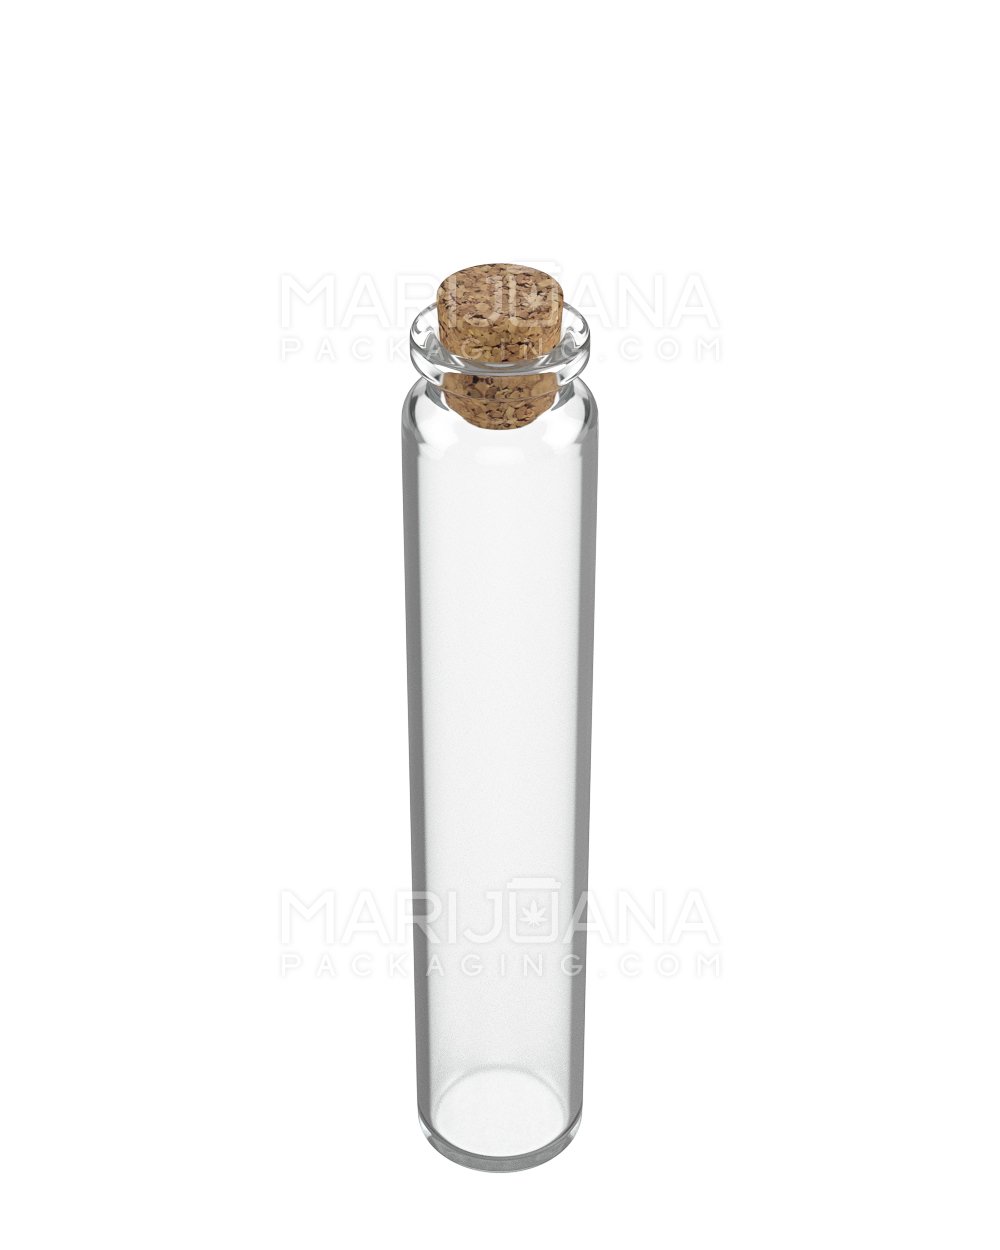 Glass Pre-Roll Tube with Cork Top | 120mm - Clear Glass - 586 Count - 3